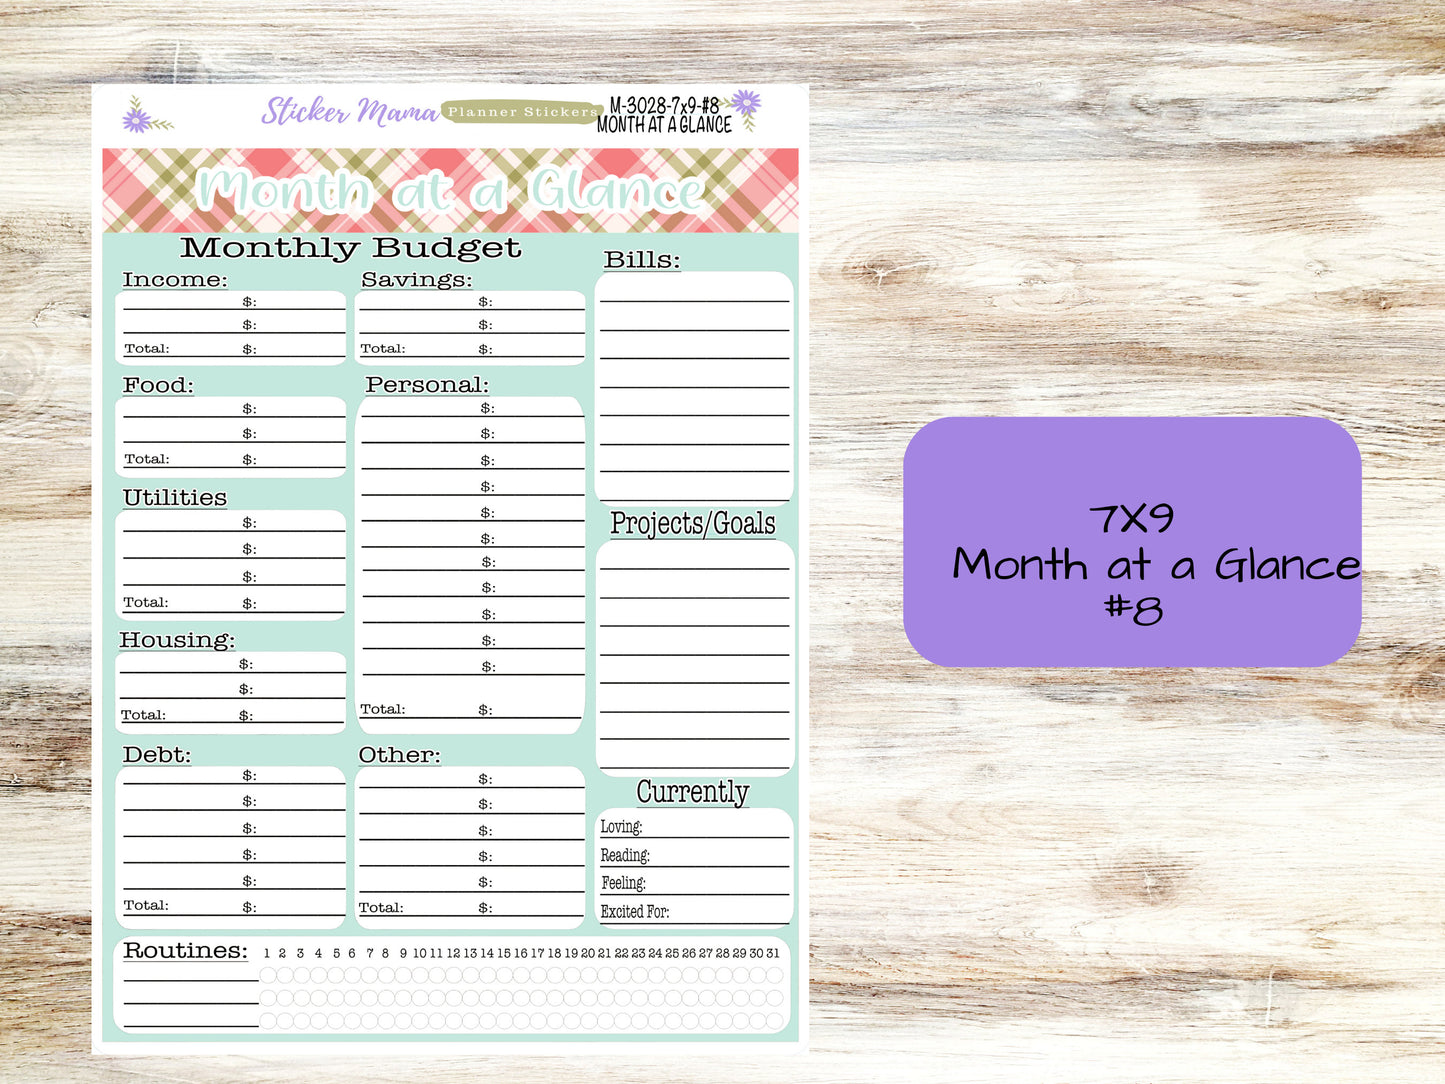 BUDGET - MONTH @ a GLANCE-3028 || A5 & 7x9 || Budget Sticker Kit || Notes Page Stickers || Planner Budget Kit